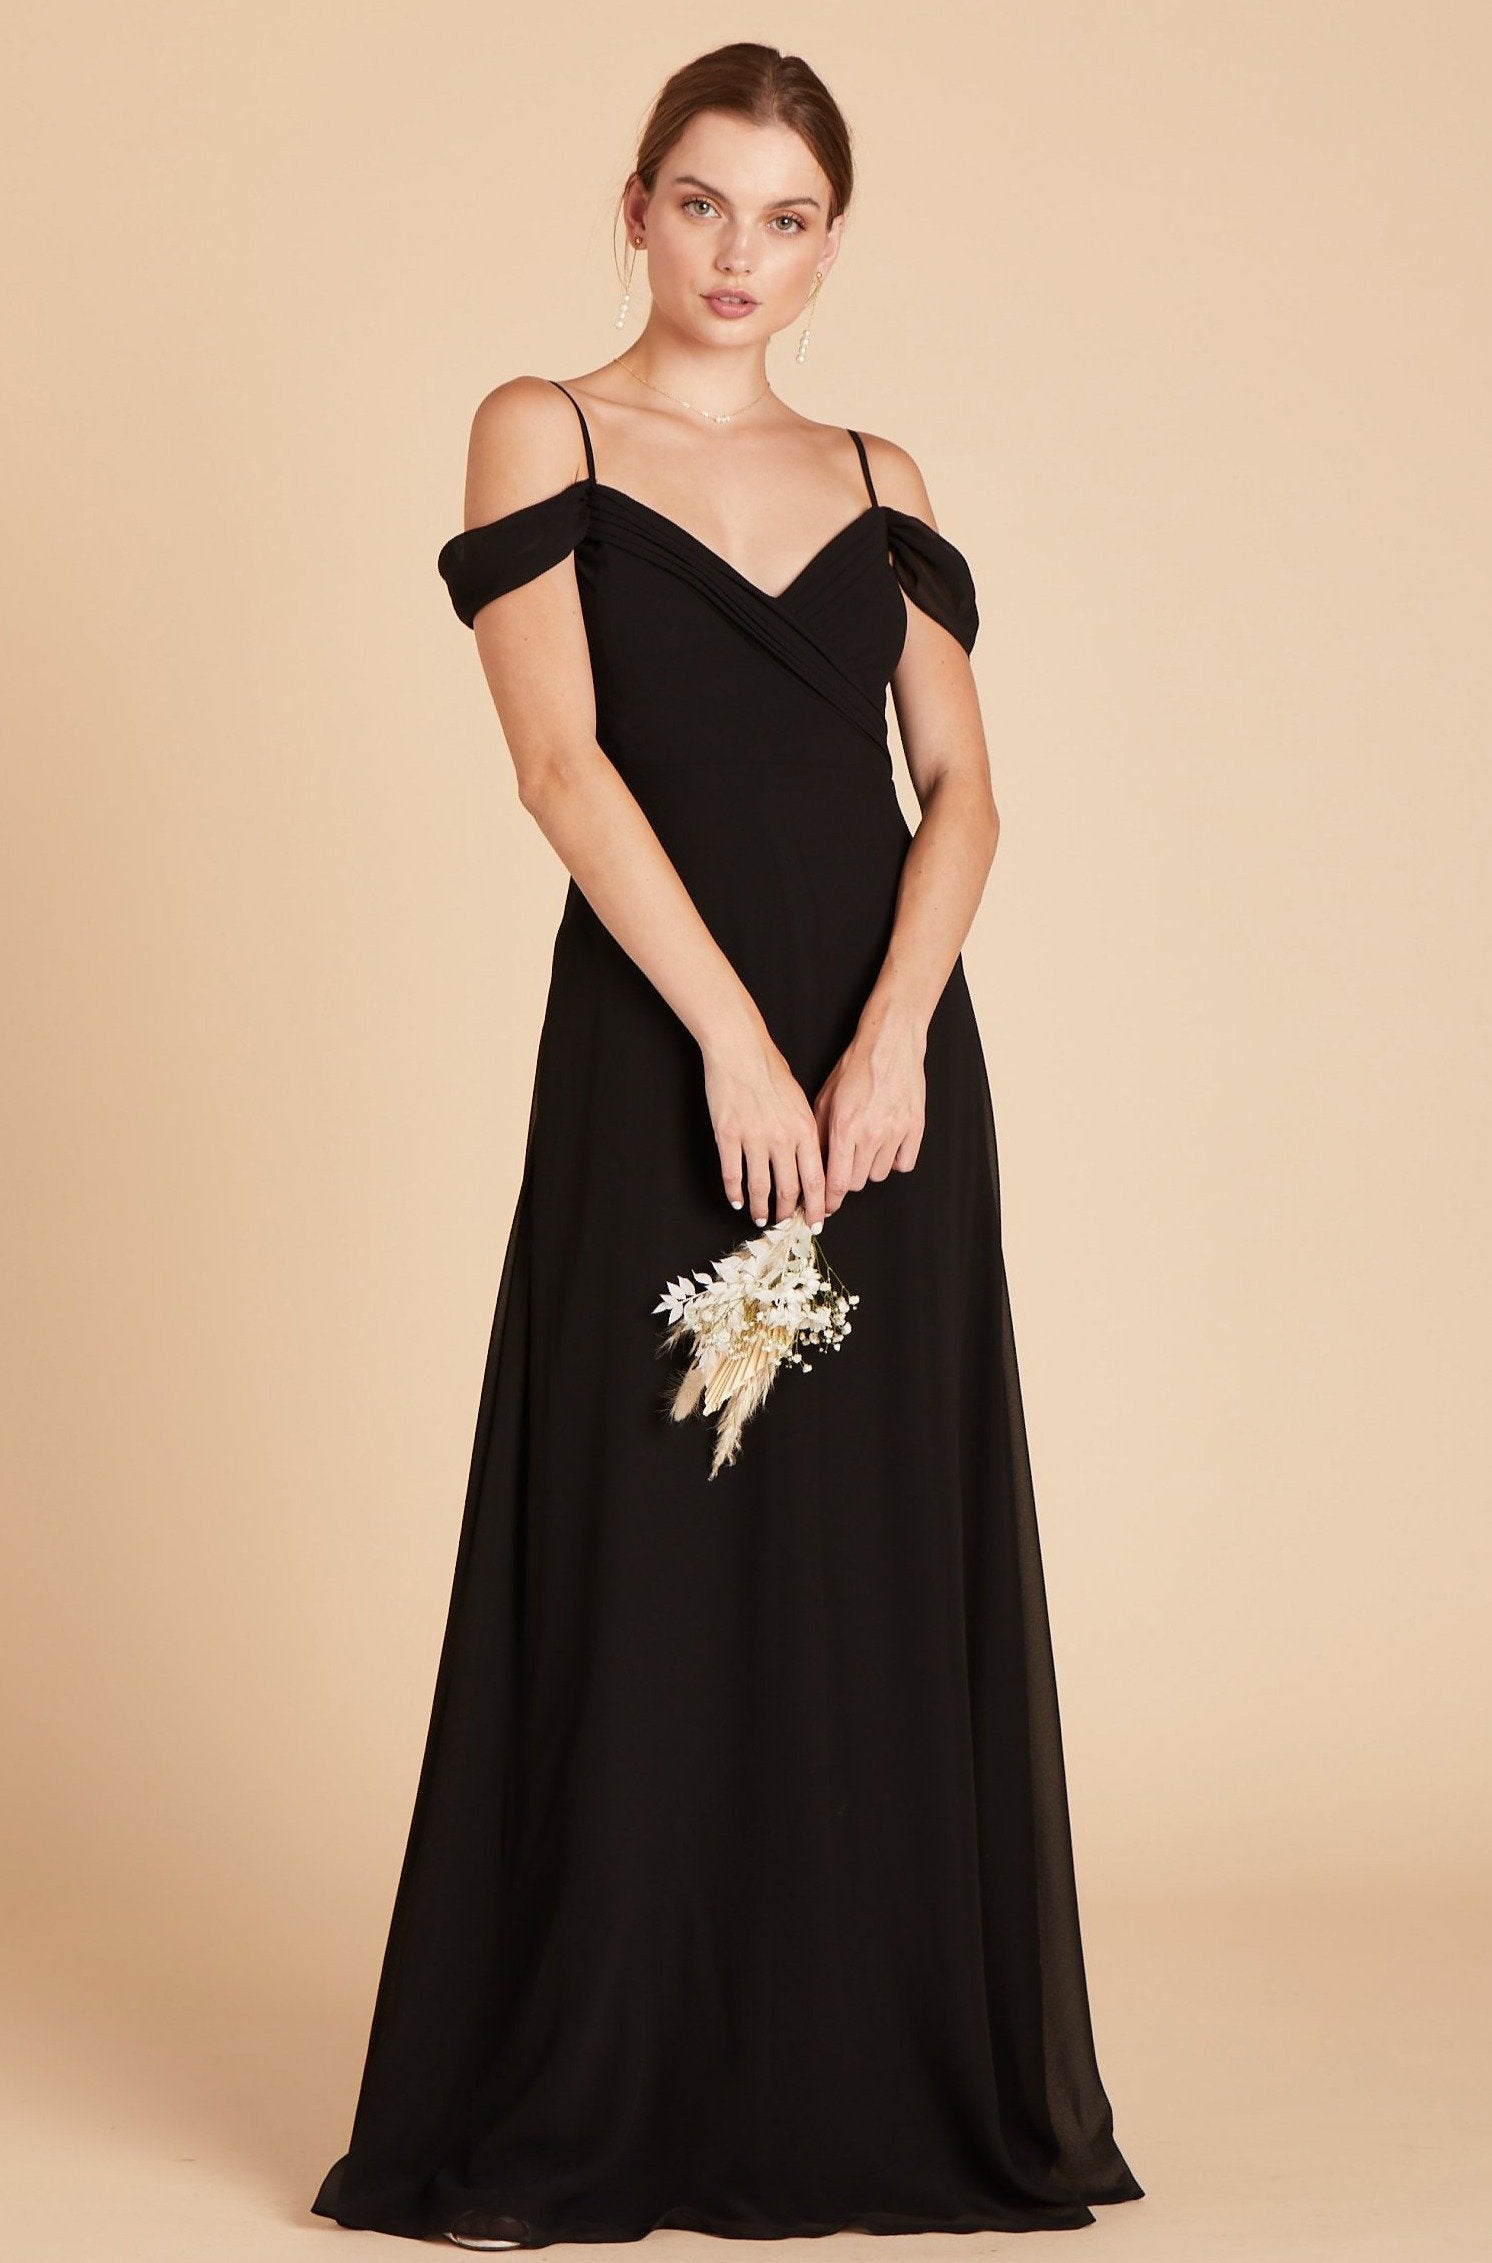 Spence convertible bridesmaid dress in black chiffon by Birdy Grey, front view